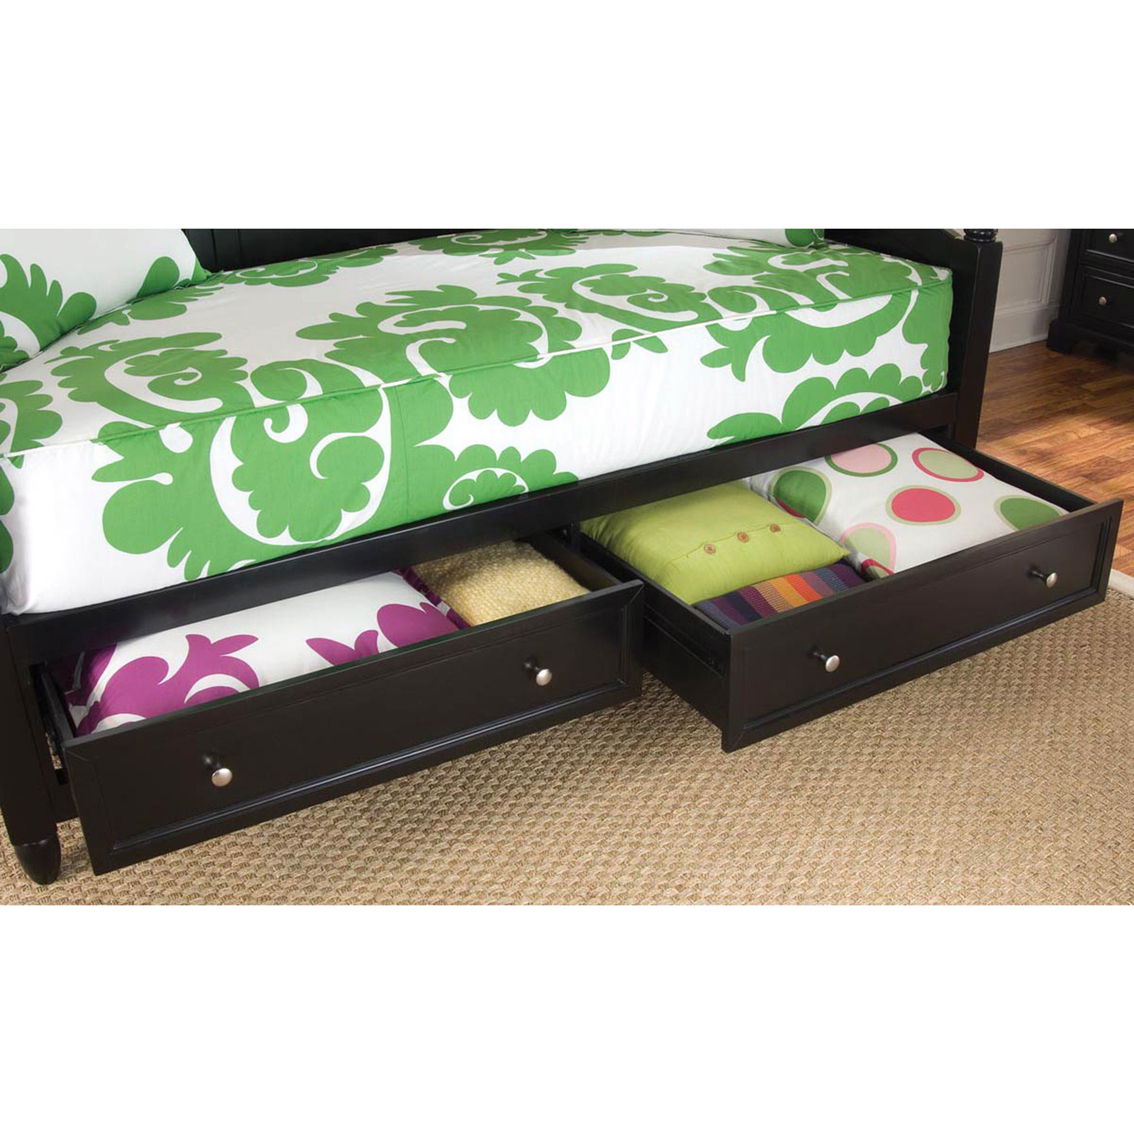 Home Styles Bedford Daybed - Image 2 of 2